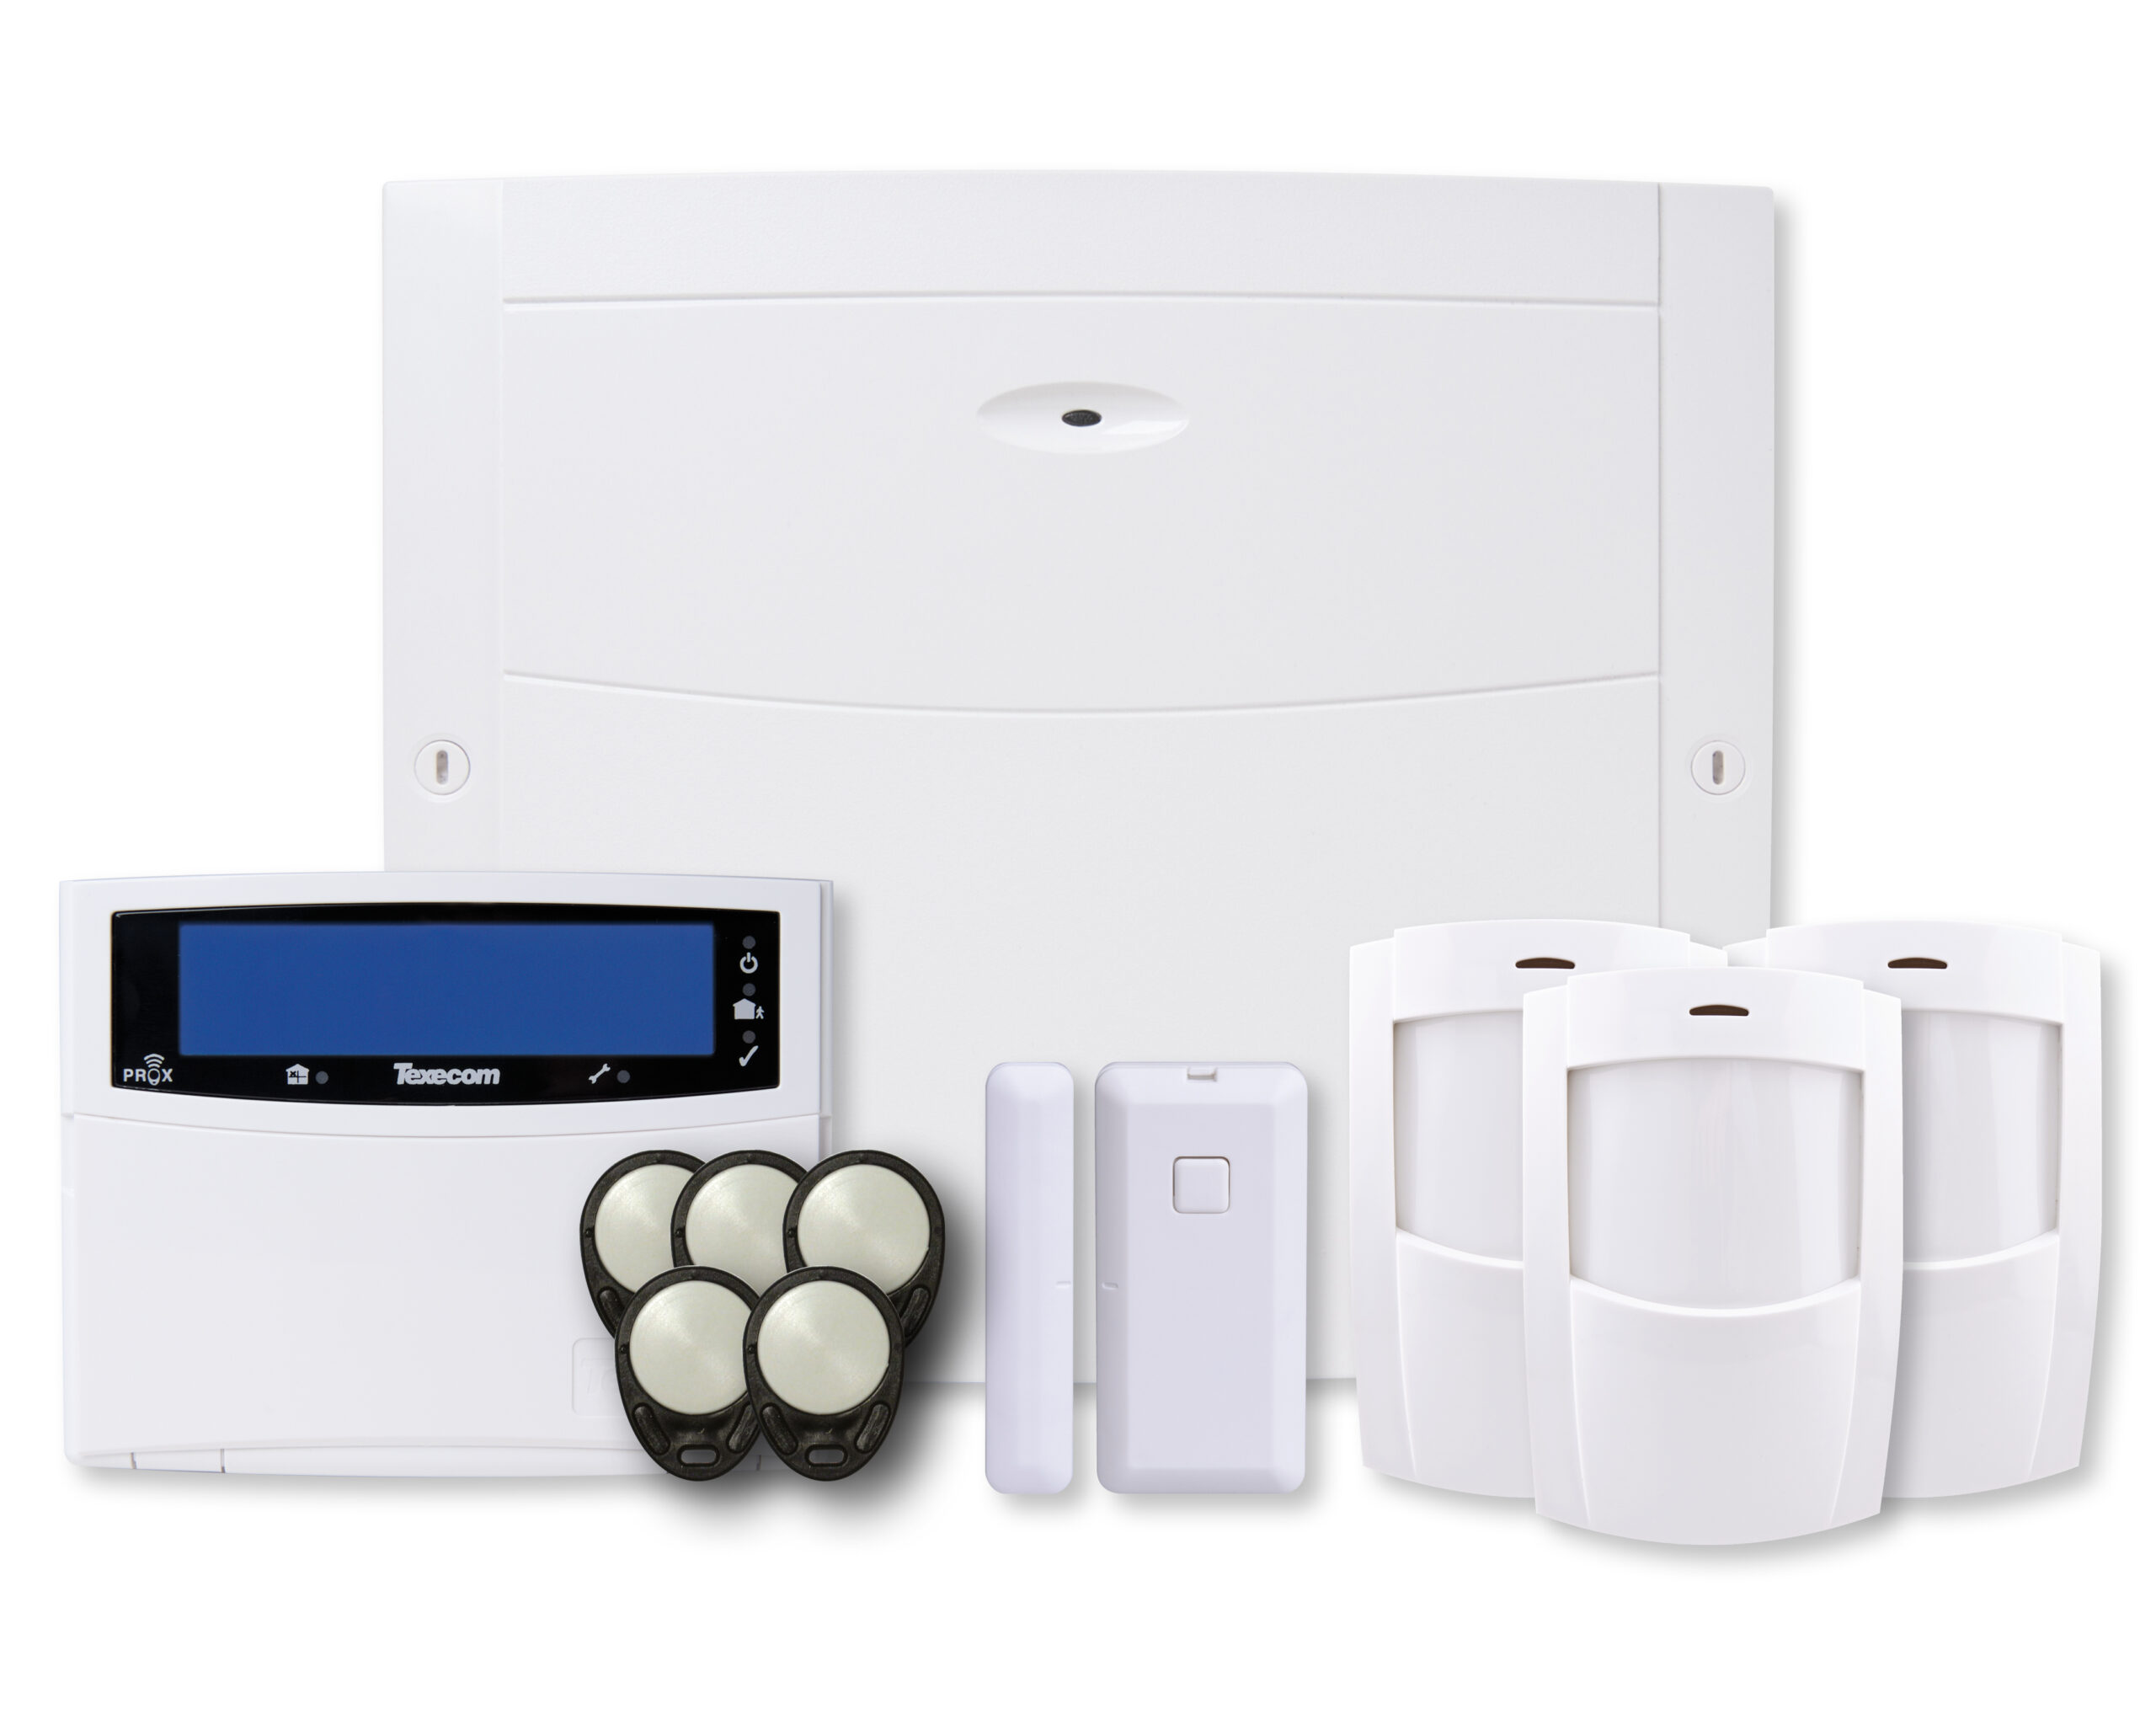 Intruder Alarms – What To Consider When Buying